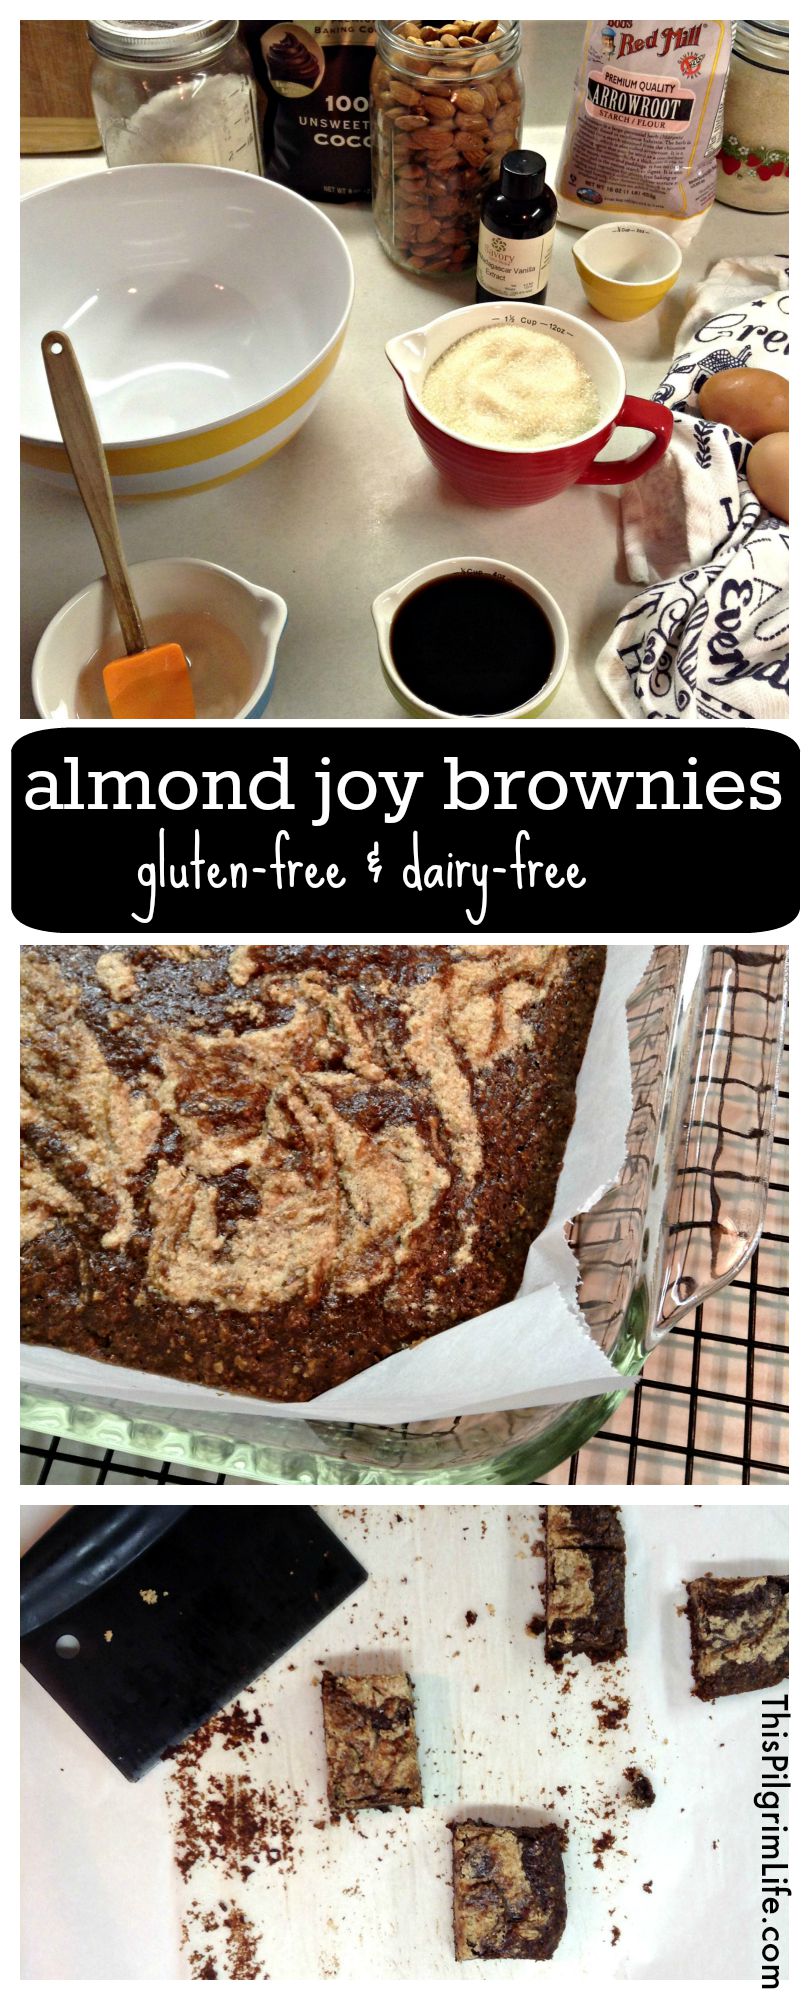 These almond joy brownies are delicious AND gluten-free and dairy-free. Quick and simple to make, too. 